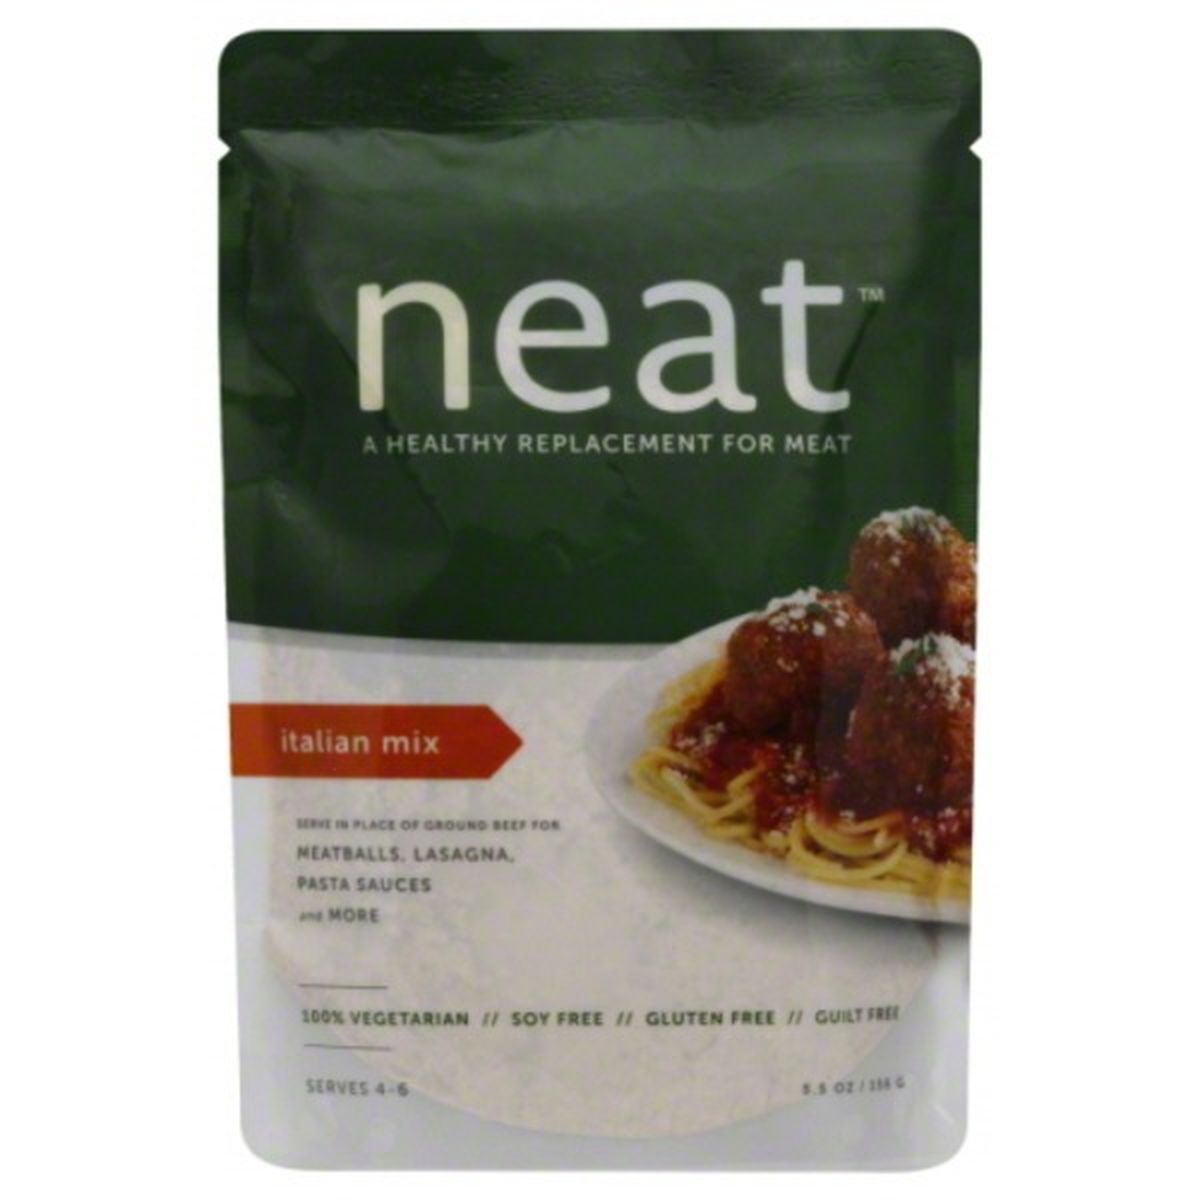 Calories in neat Replacement for Meat, Healthy, Italian Mix